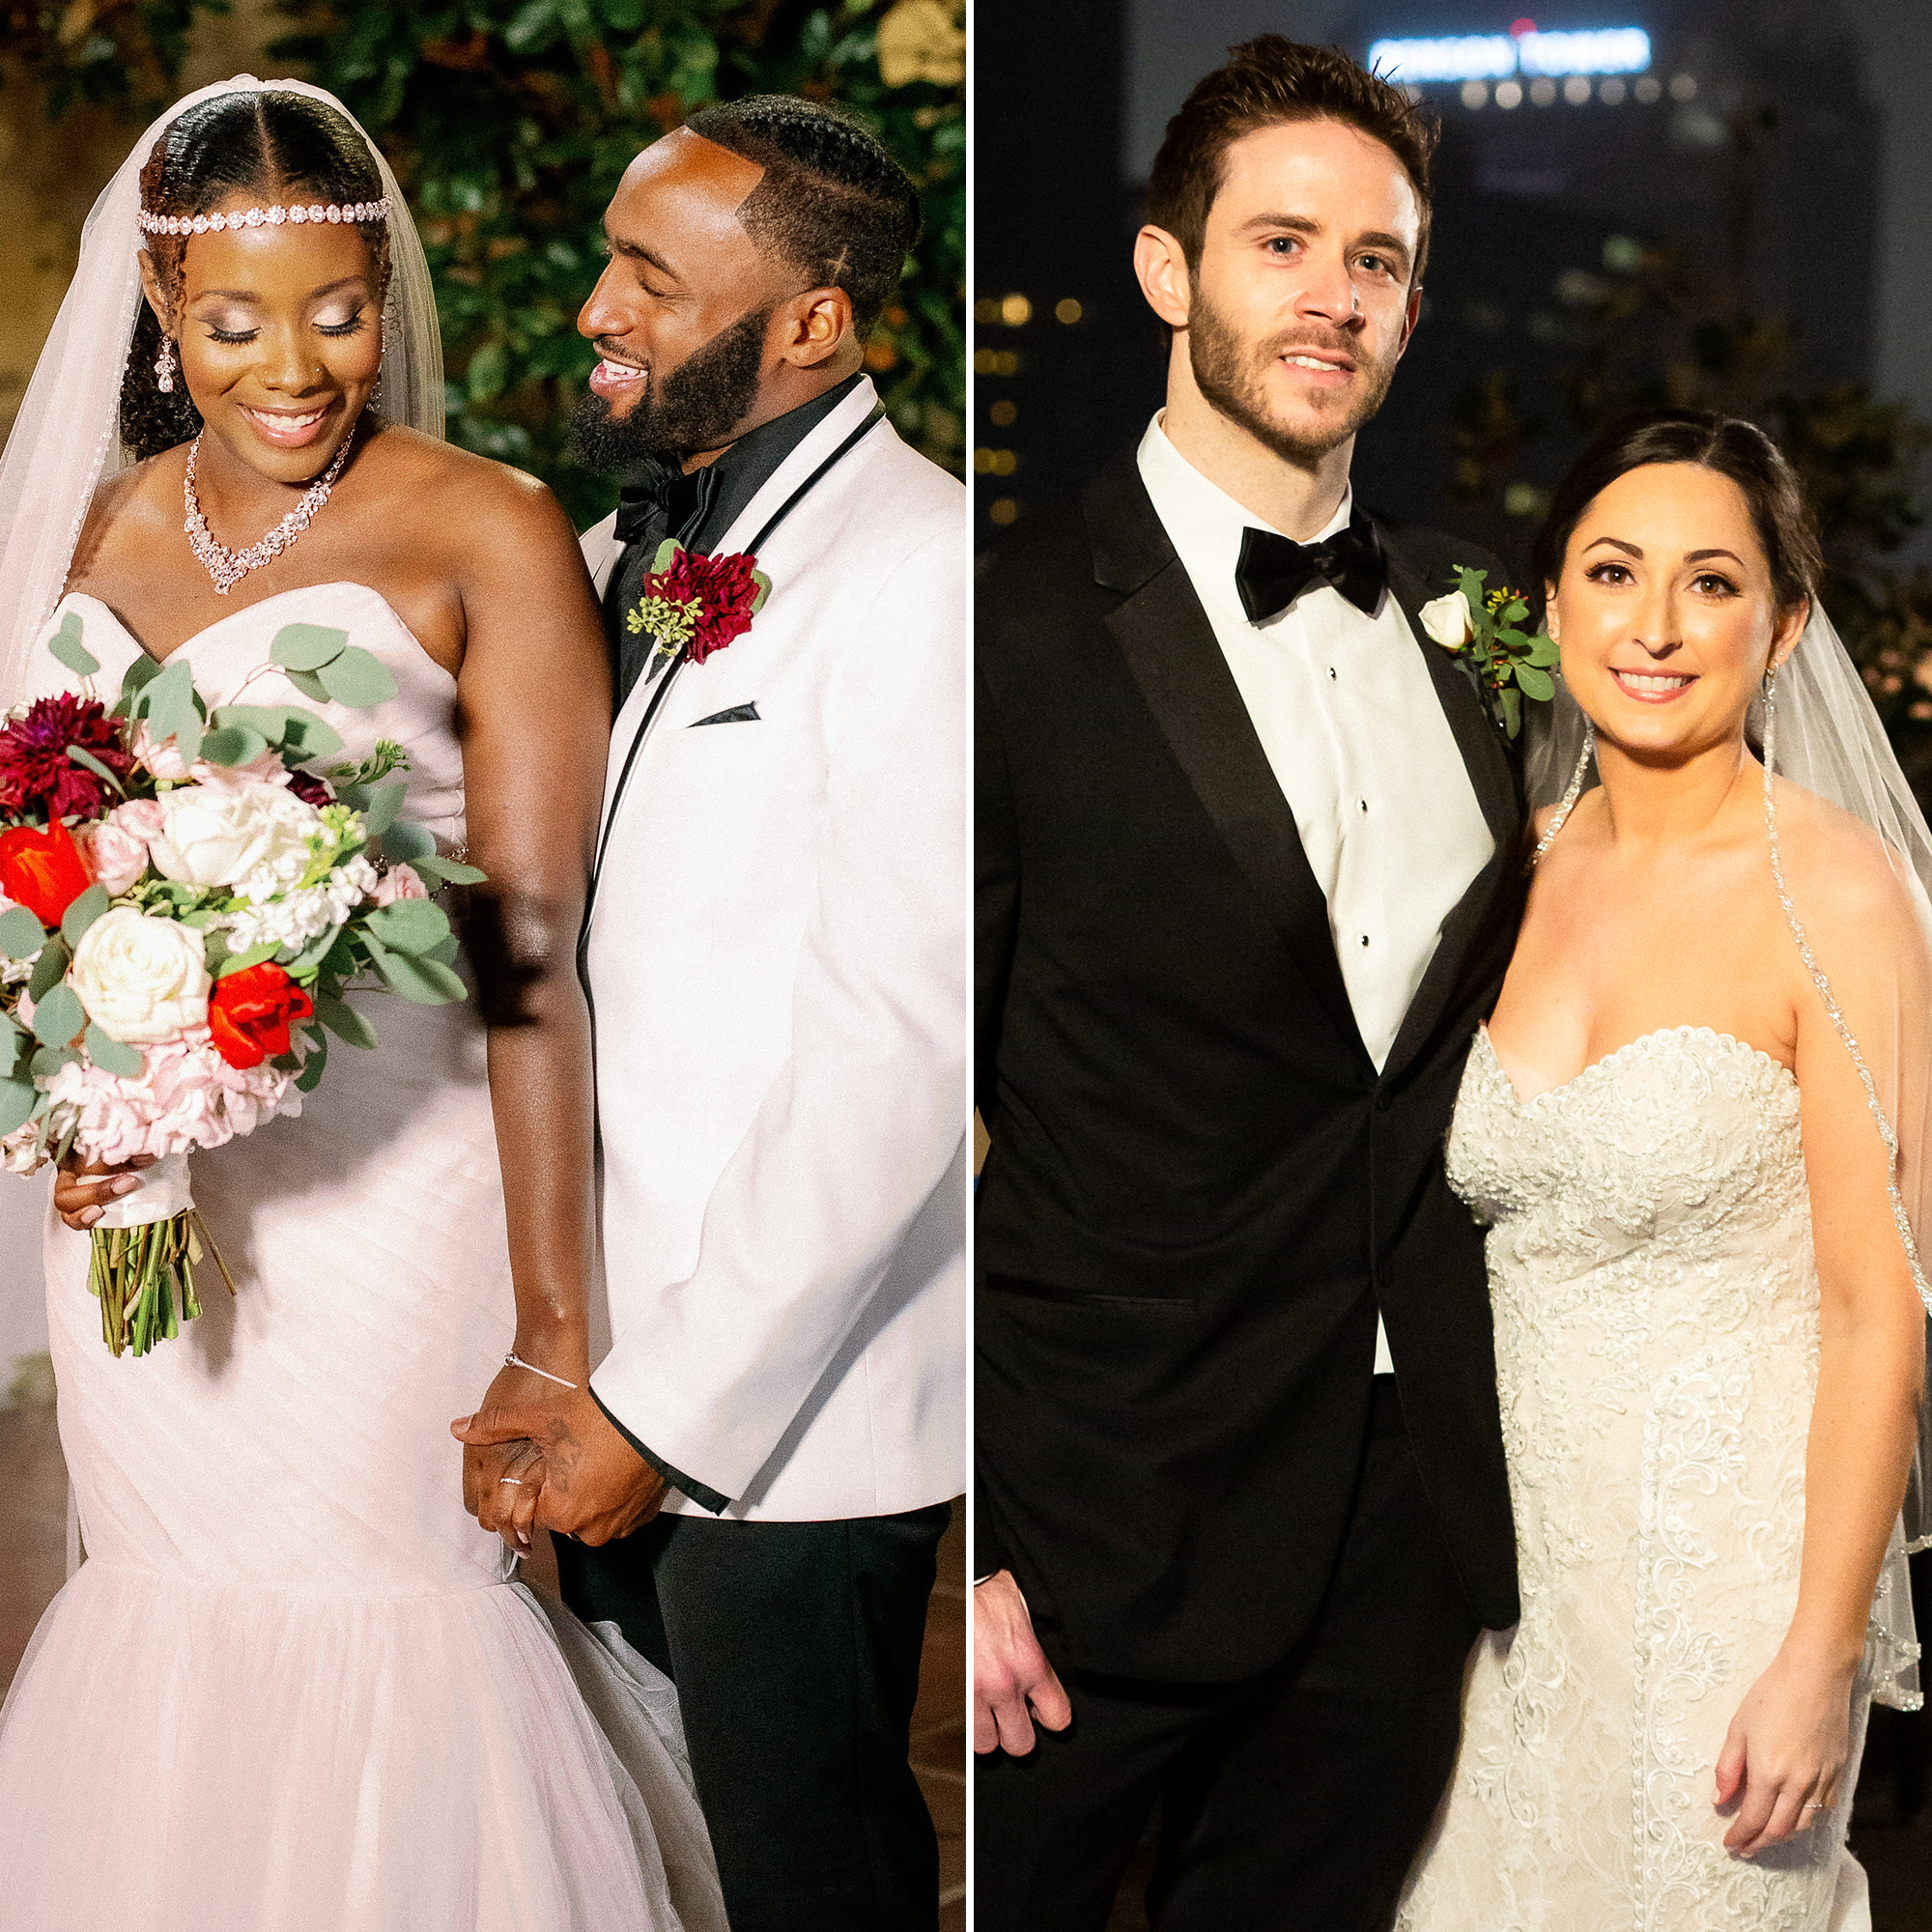 Who Stays Together on 'Married At First Sight' Season 11?